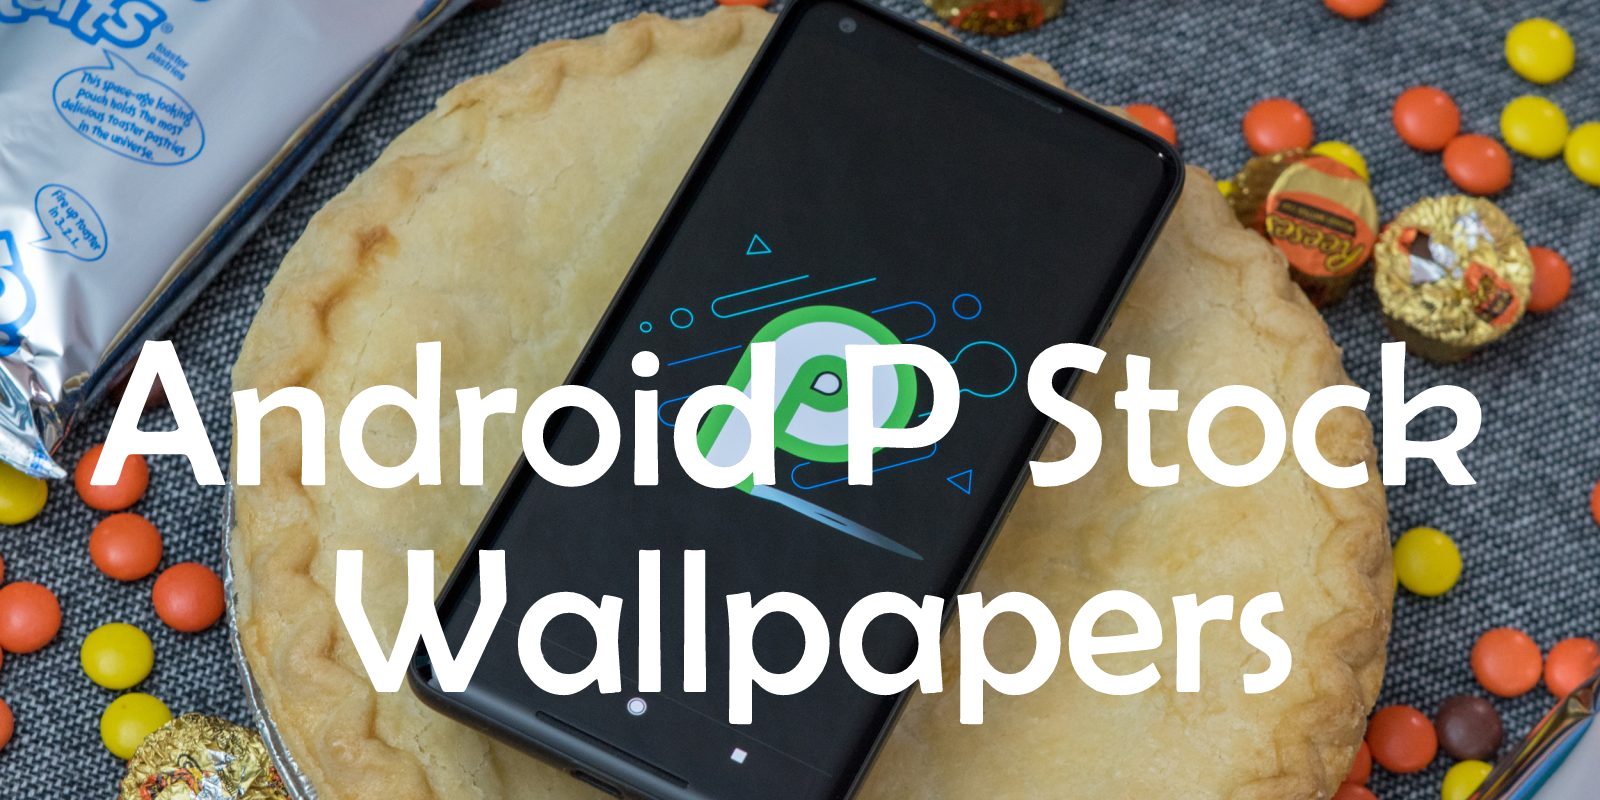 Android P Stock Wallpapers